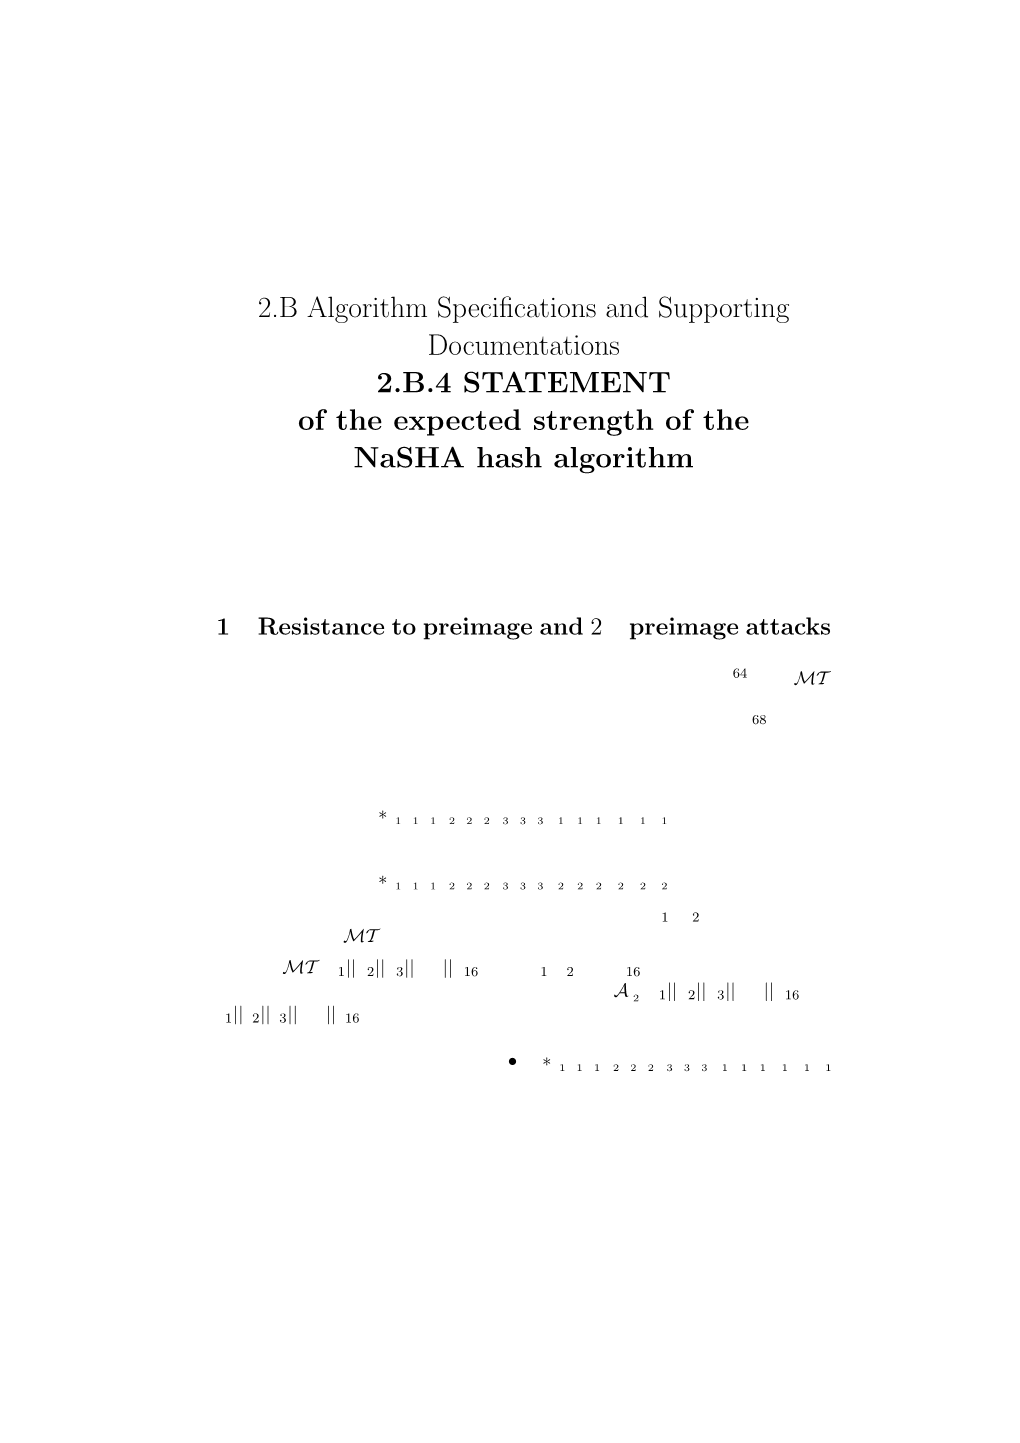 2.B Algorithm Specifications and Supporting Documentations 2.B.4